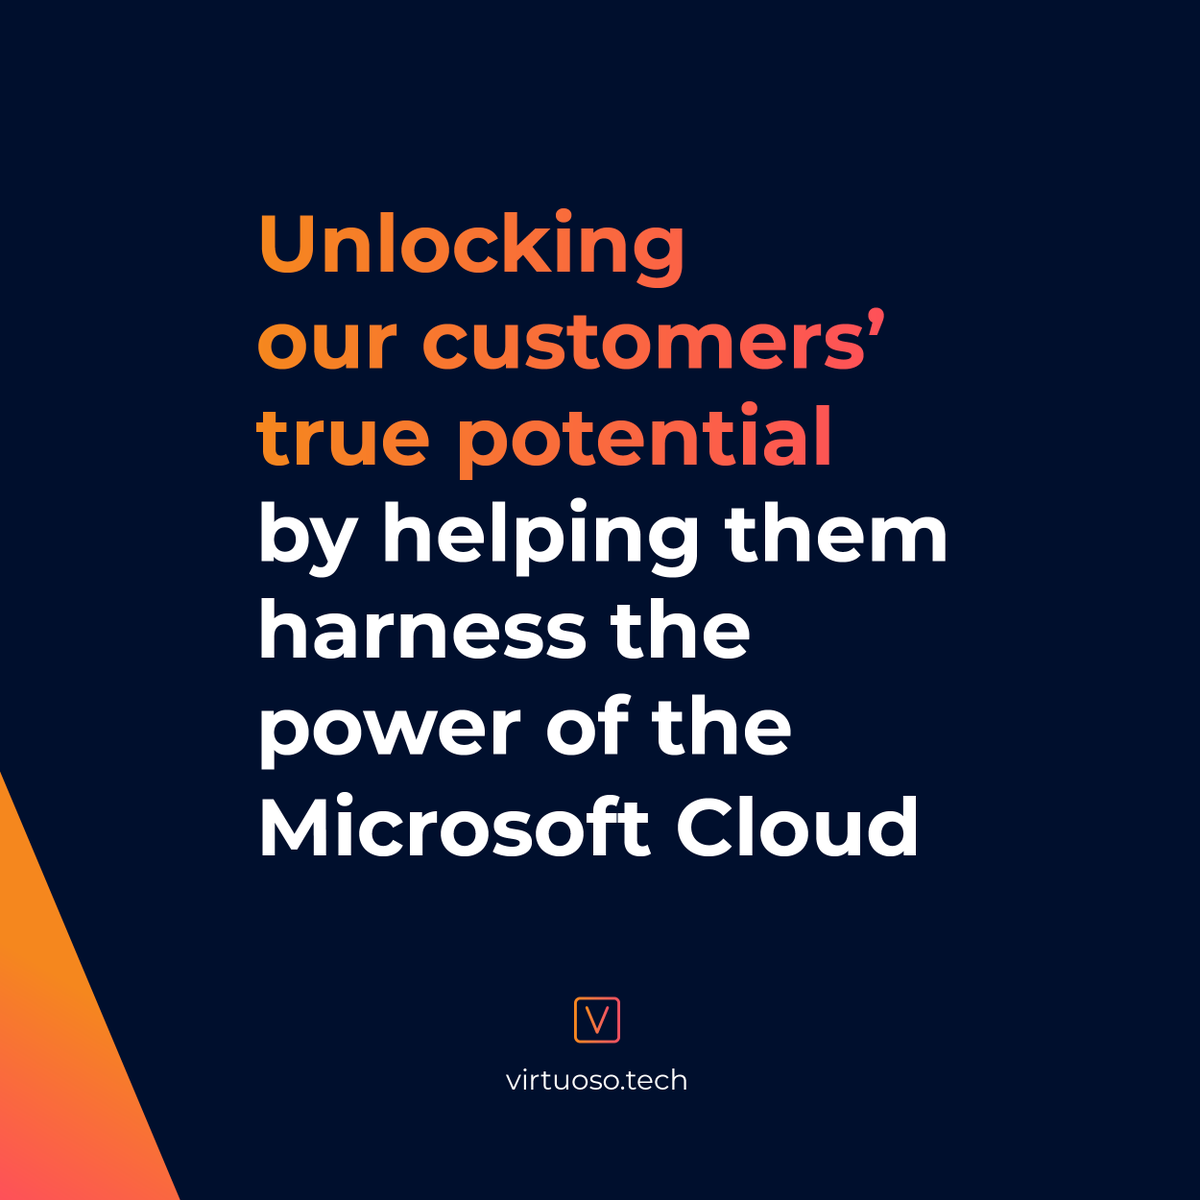 We’re all in with Microsoft 365! Empowering customers with modern technology and new ways of working is our passion. Say goodbye to aging on-premise infrastructure and say hello to secure collaboration and productivity that your team will love. #Virtuososocial #MicrosoftCloud